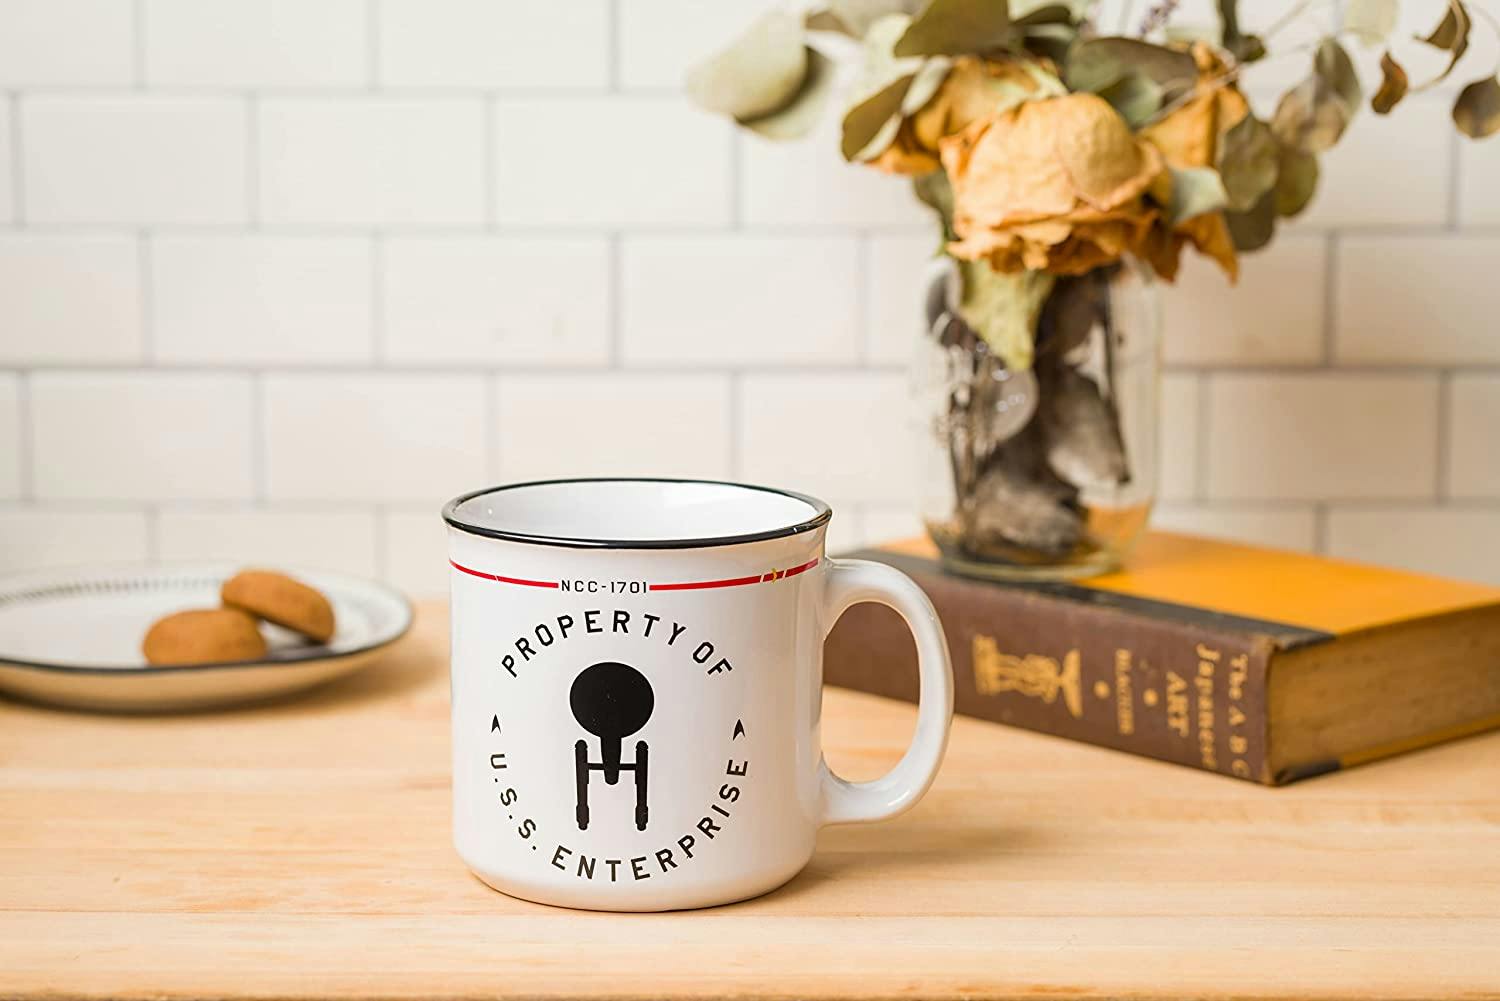 Star Trek fans can now get their hands on merch thanks to Pottery Barn